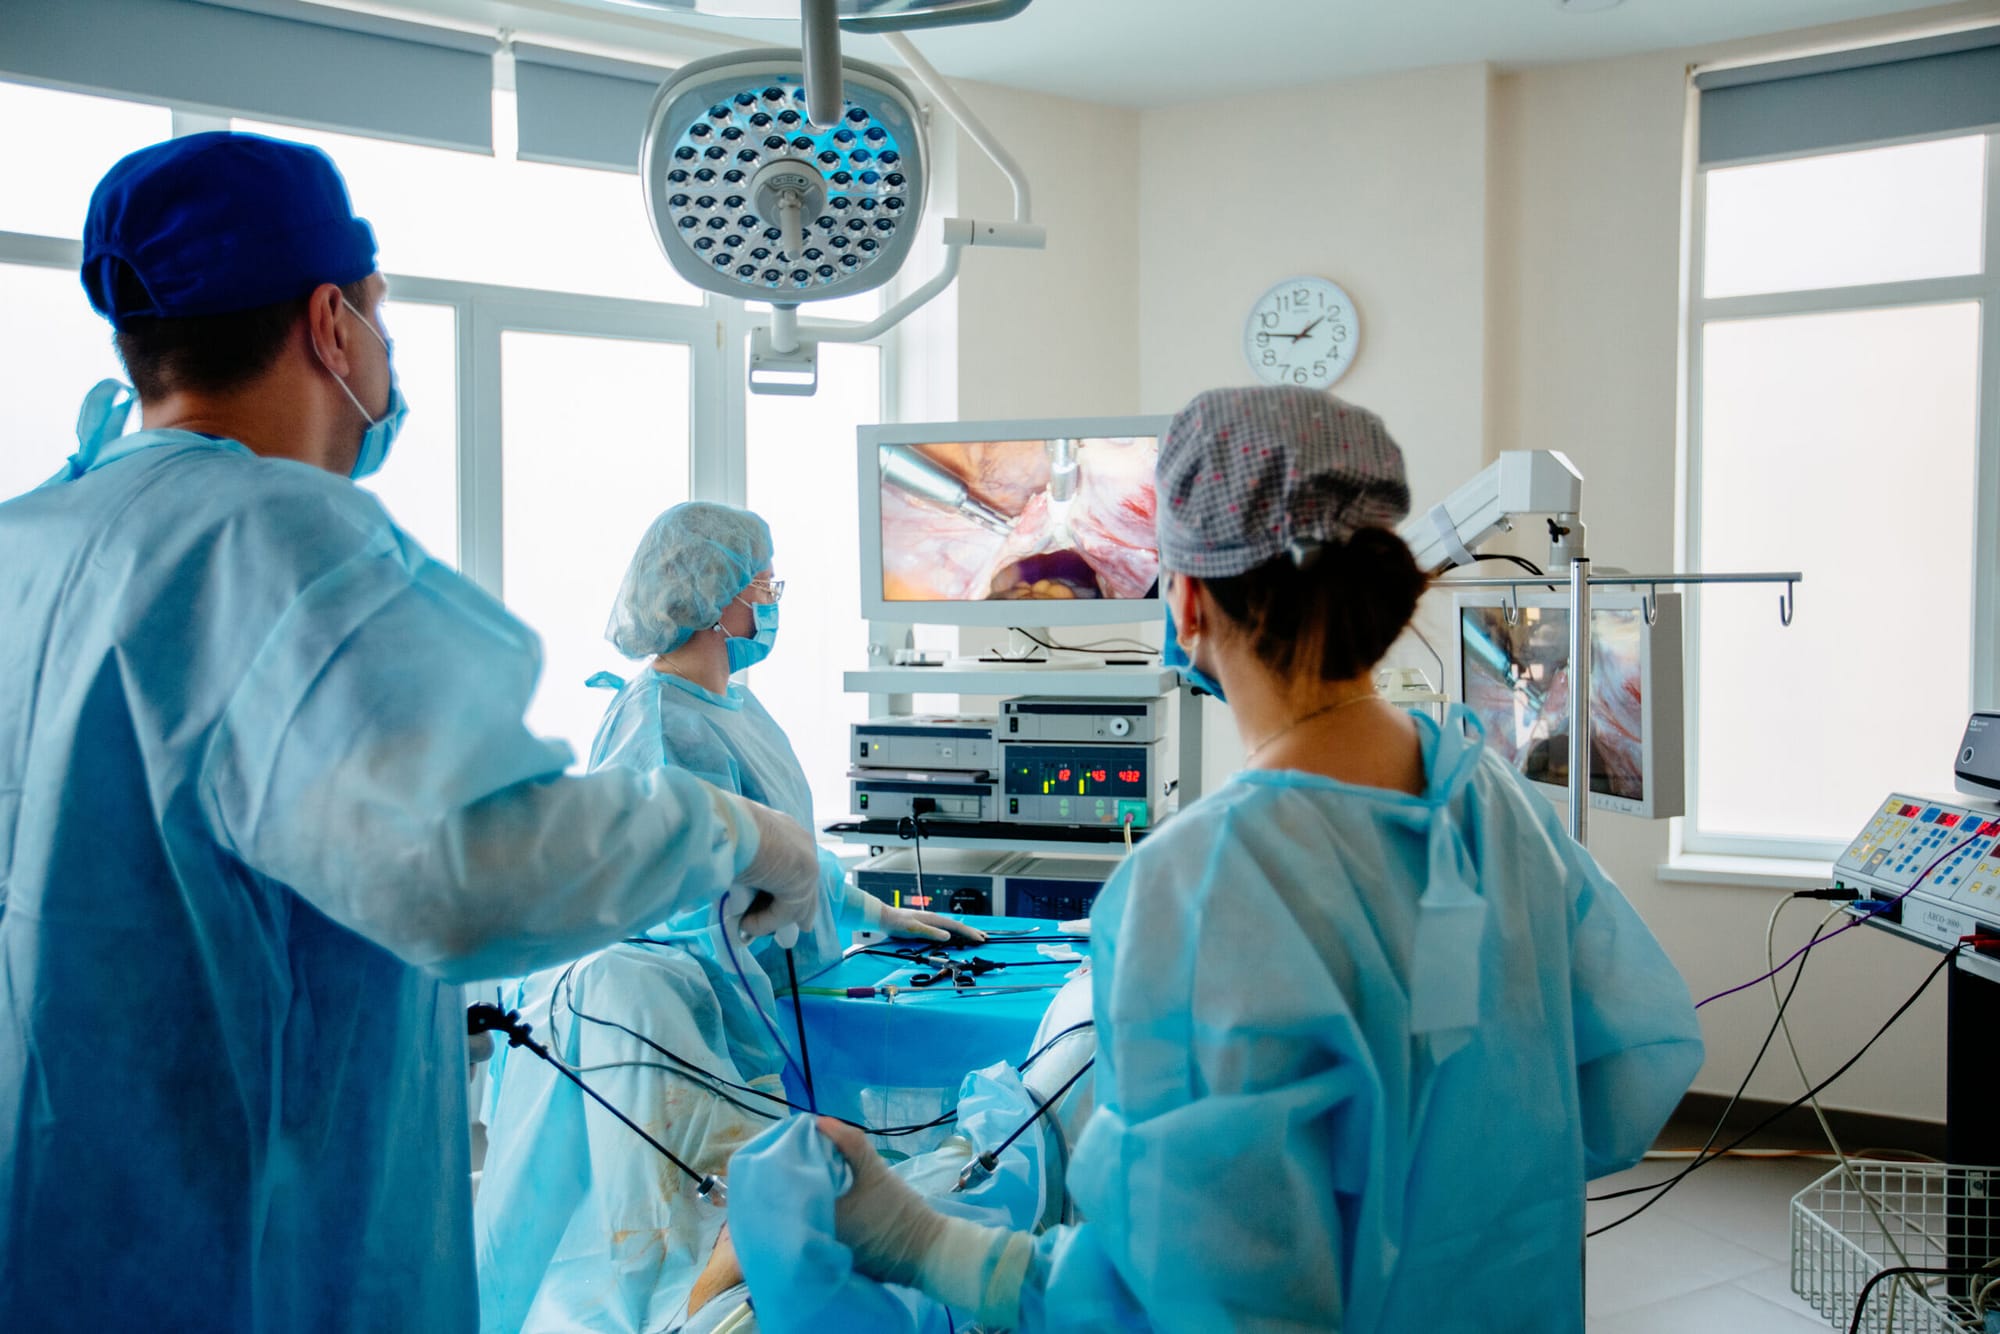 Back view of surgeons team looks at monitors while preforming operation in hospital operating theater, male surgeon operating patient working with surgical laparoscopy instruments. Gynecology.